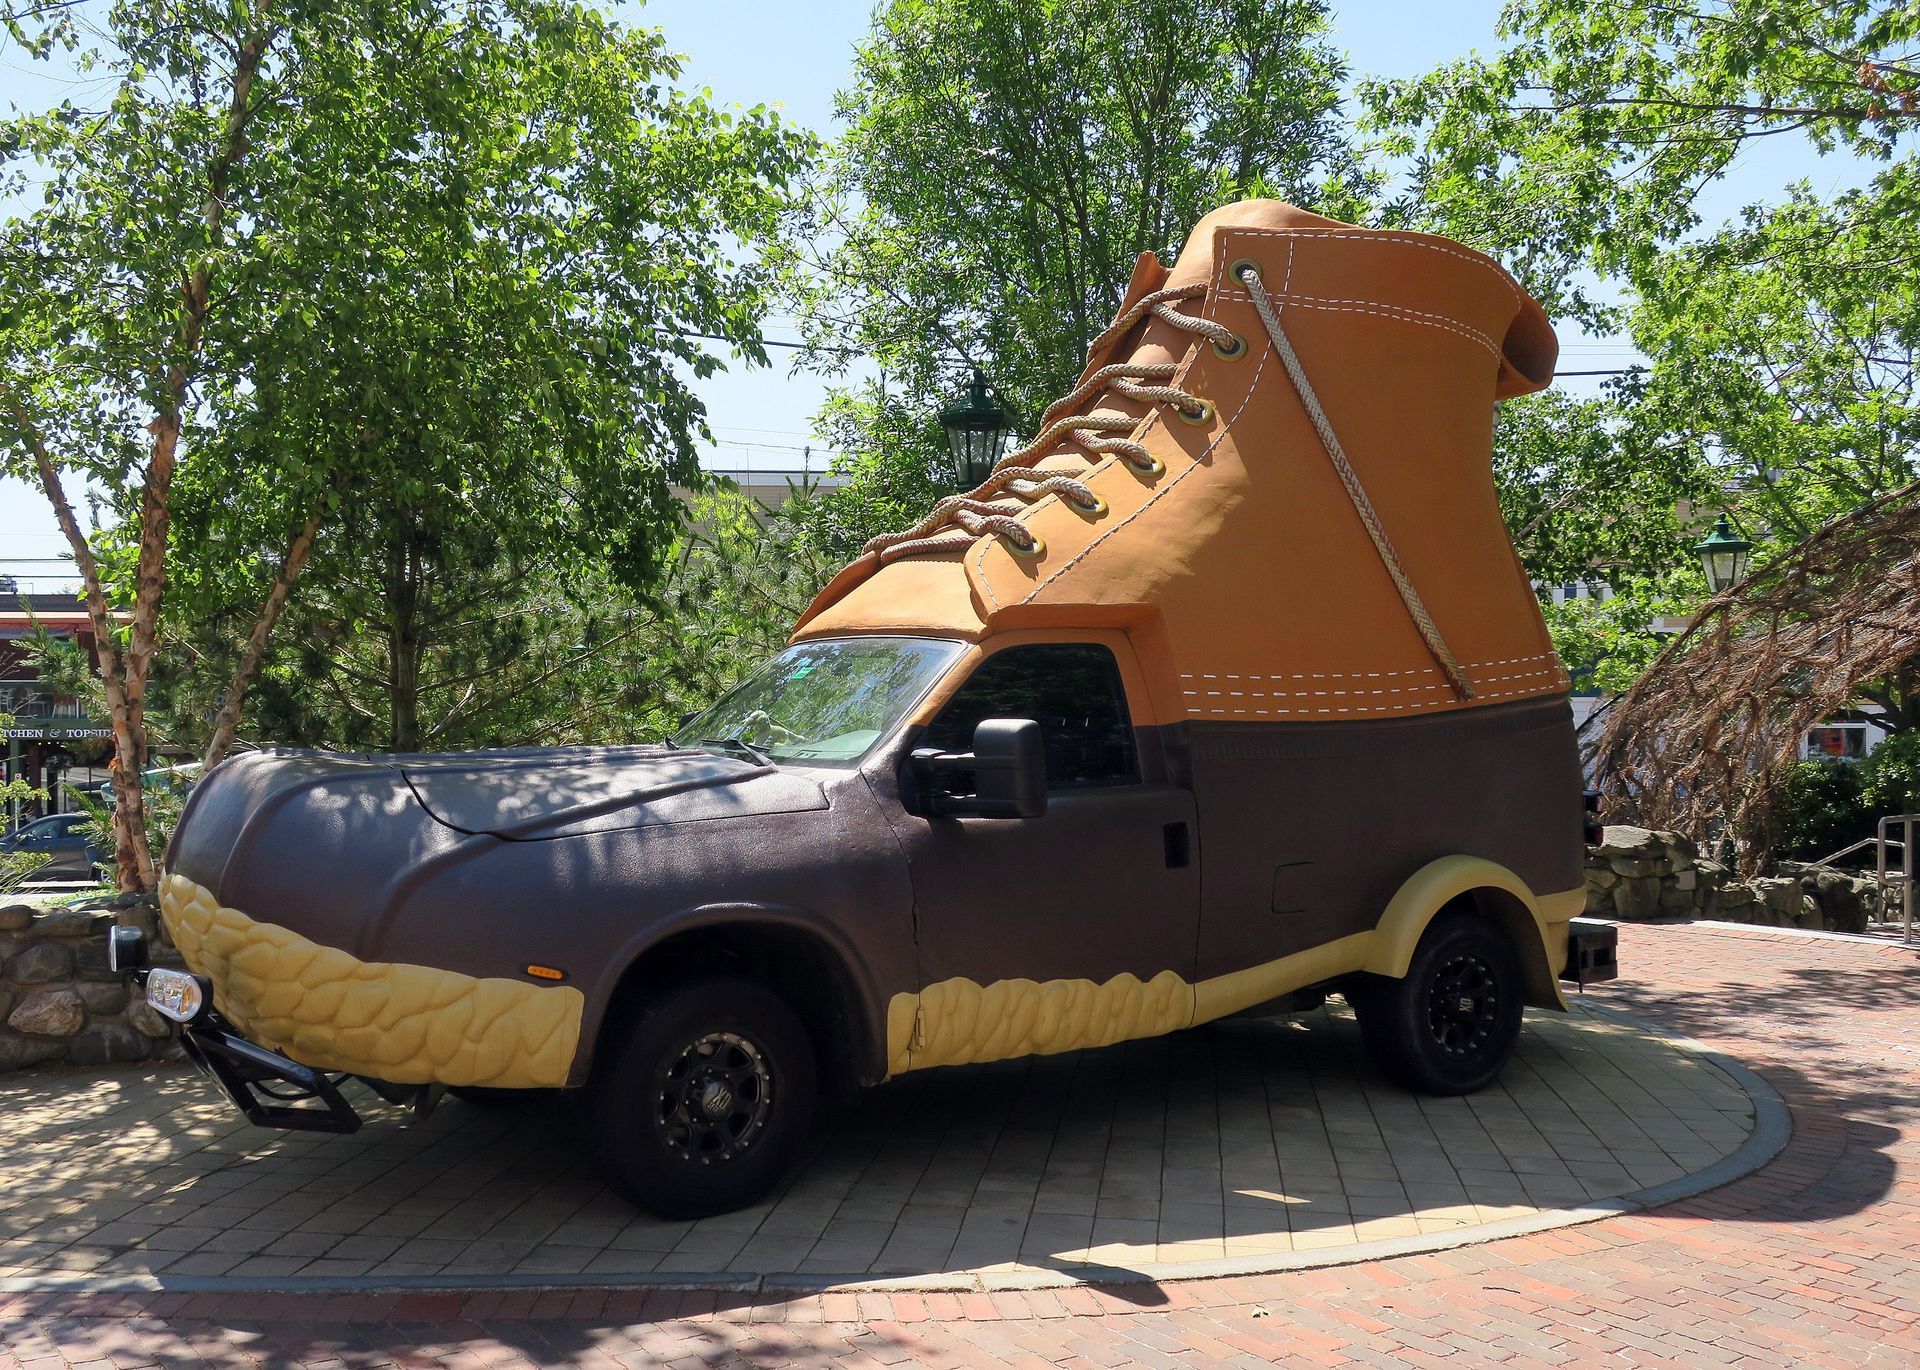 World's first boot-shaped automobile, world record set in Freeport, Maine
